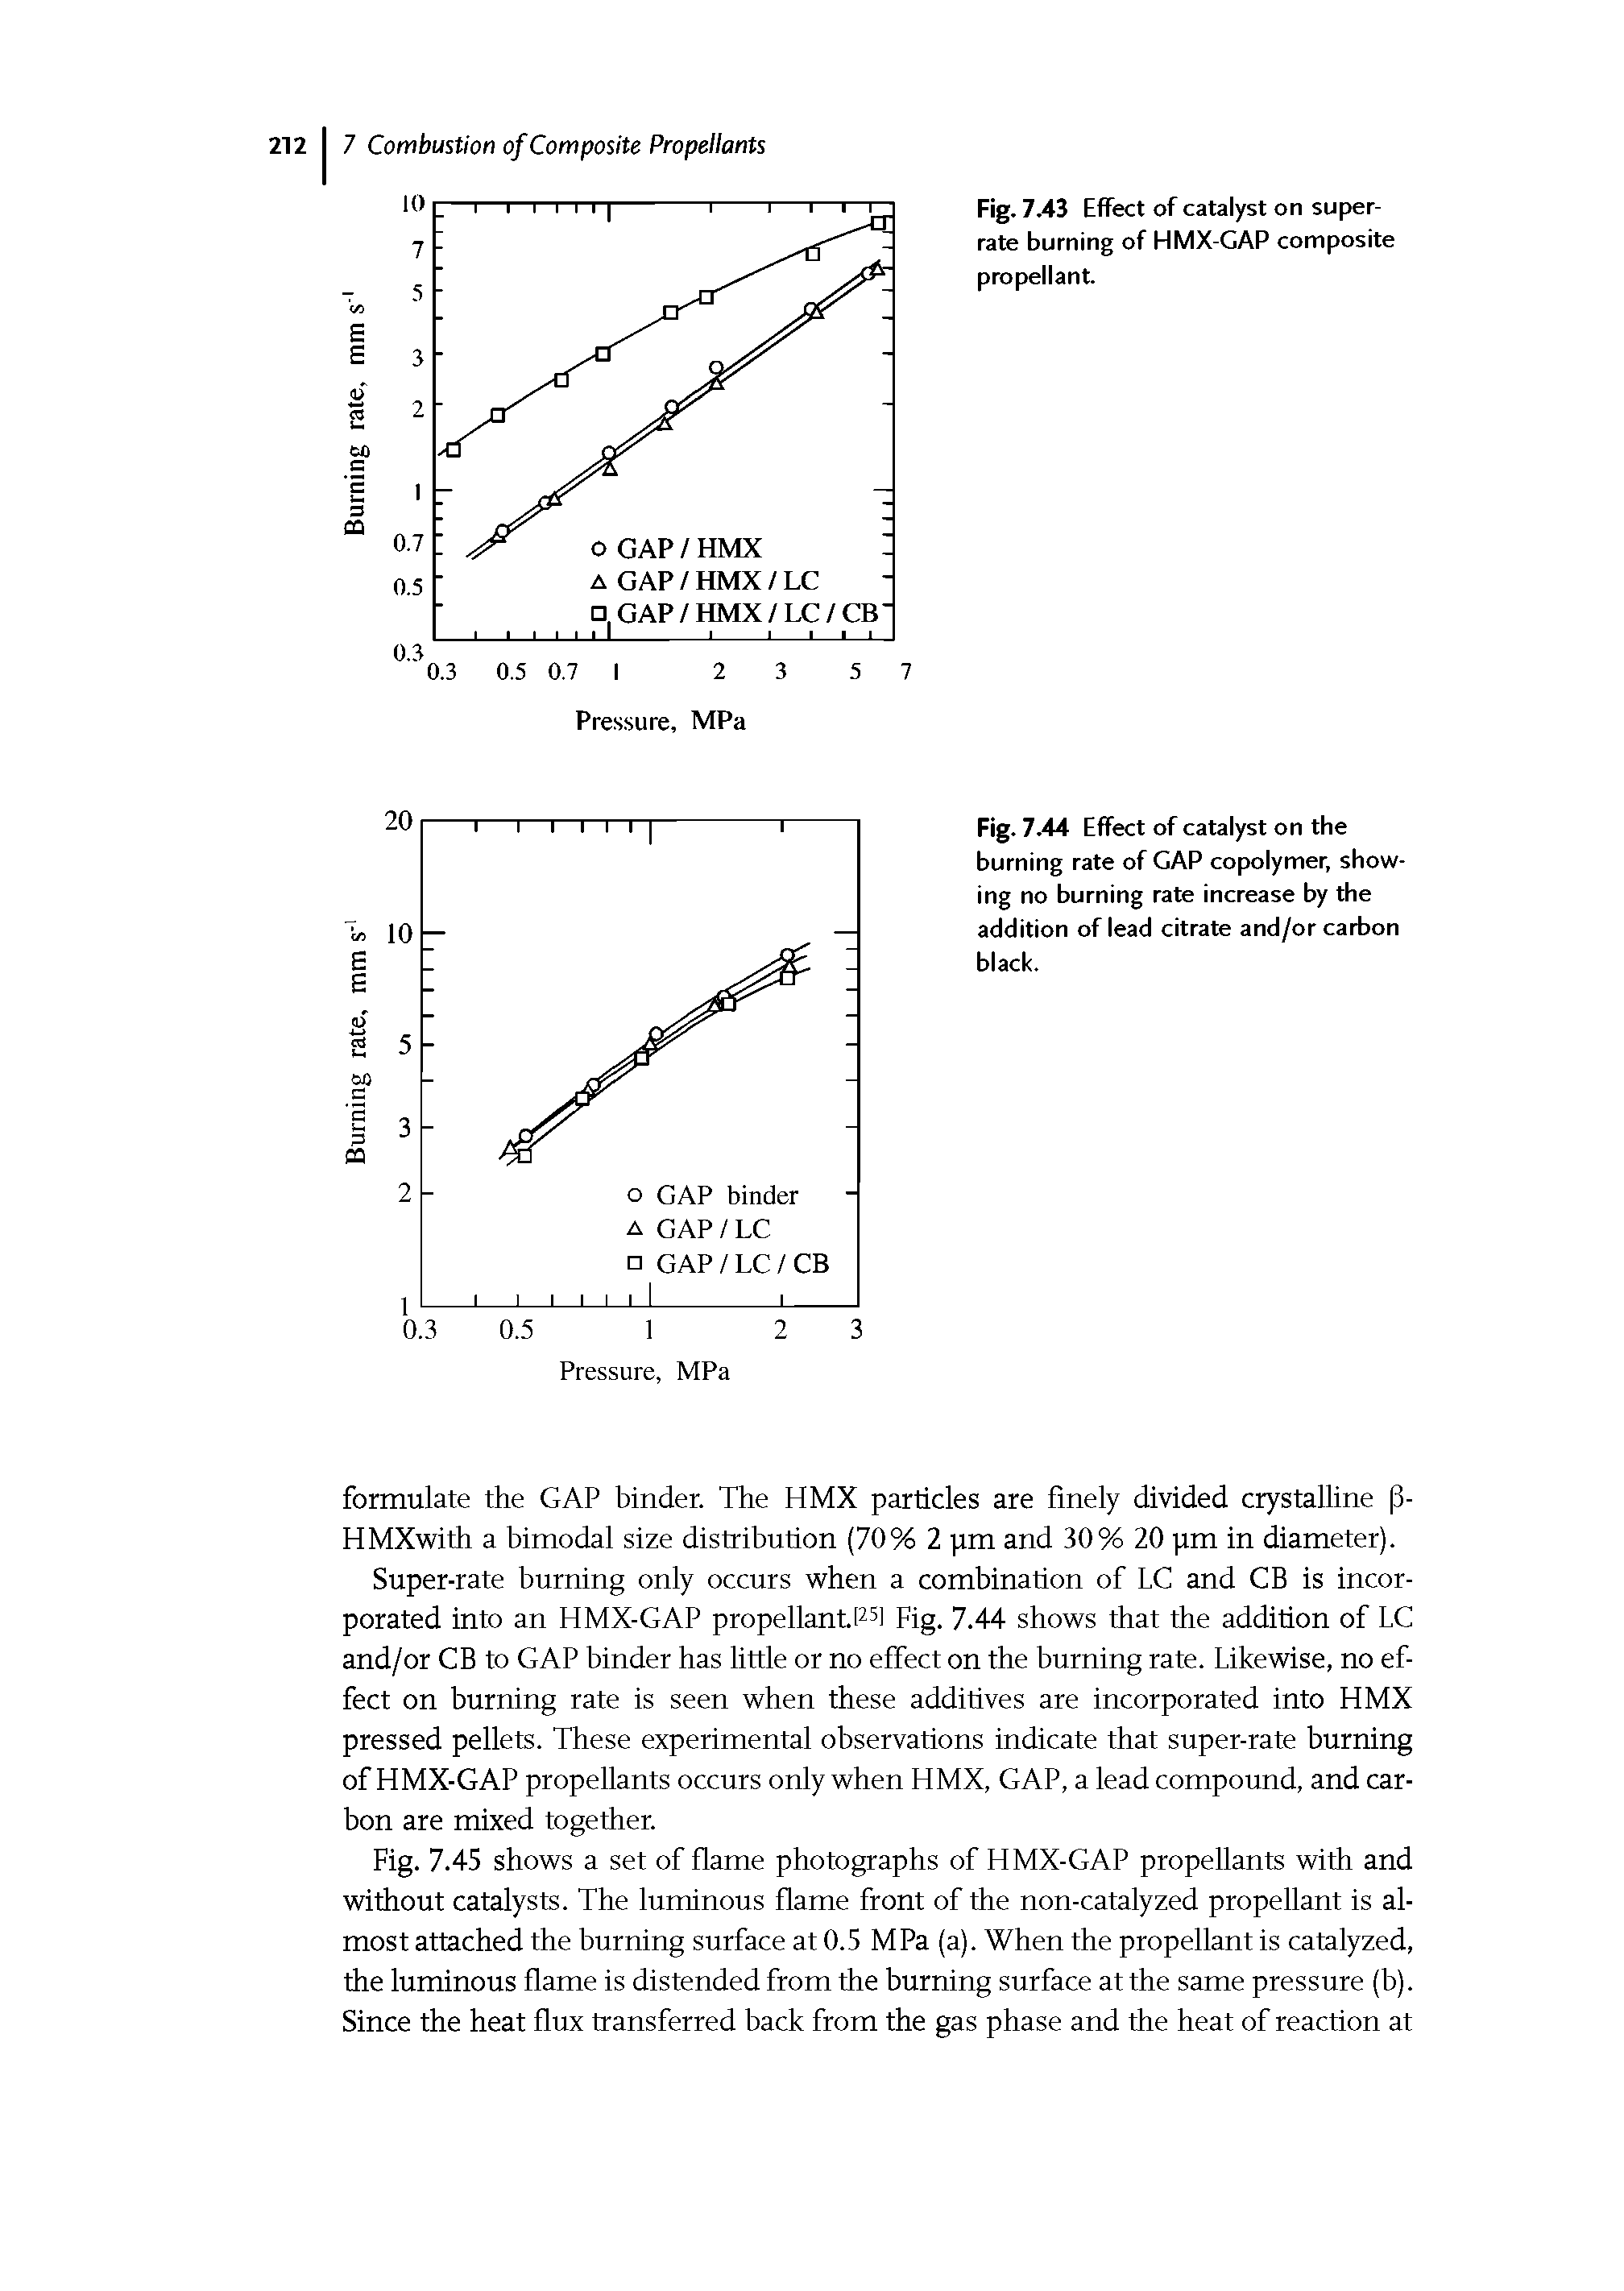 Fig. 7.43 Effect of catalyst on superrate burning of HMX-GAP composite propellant.